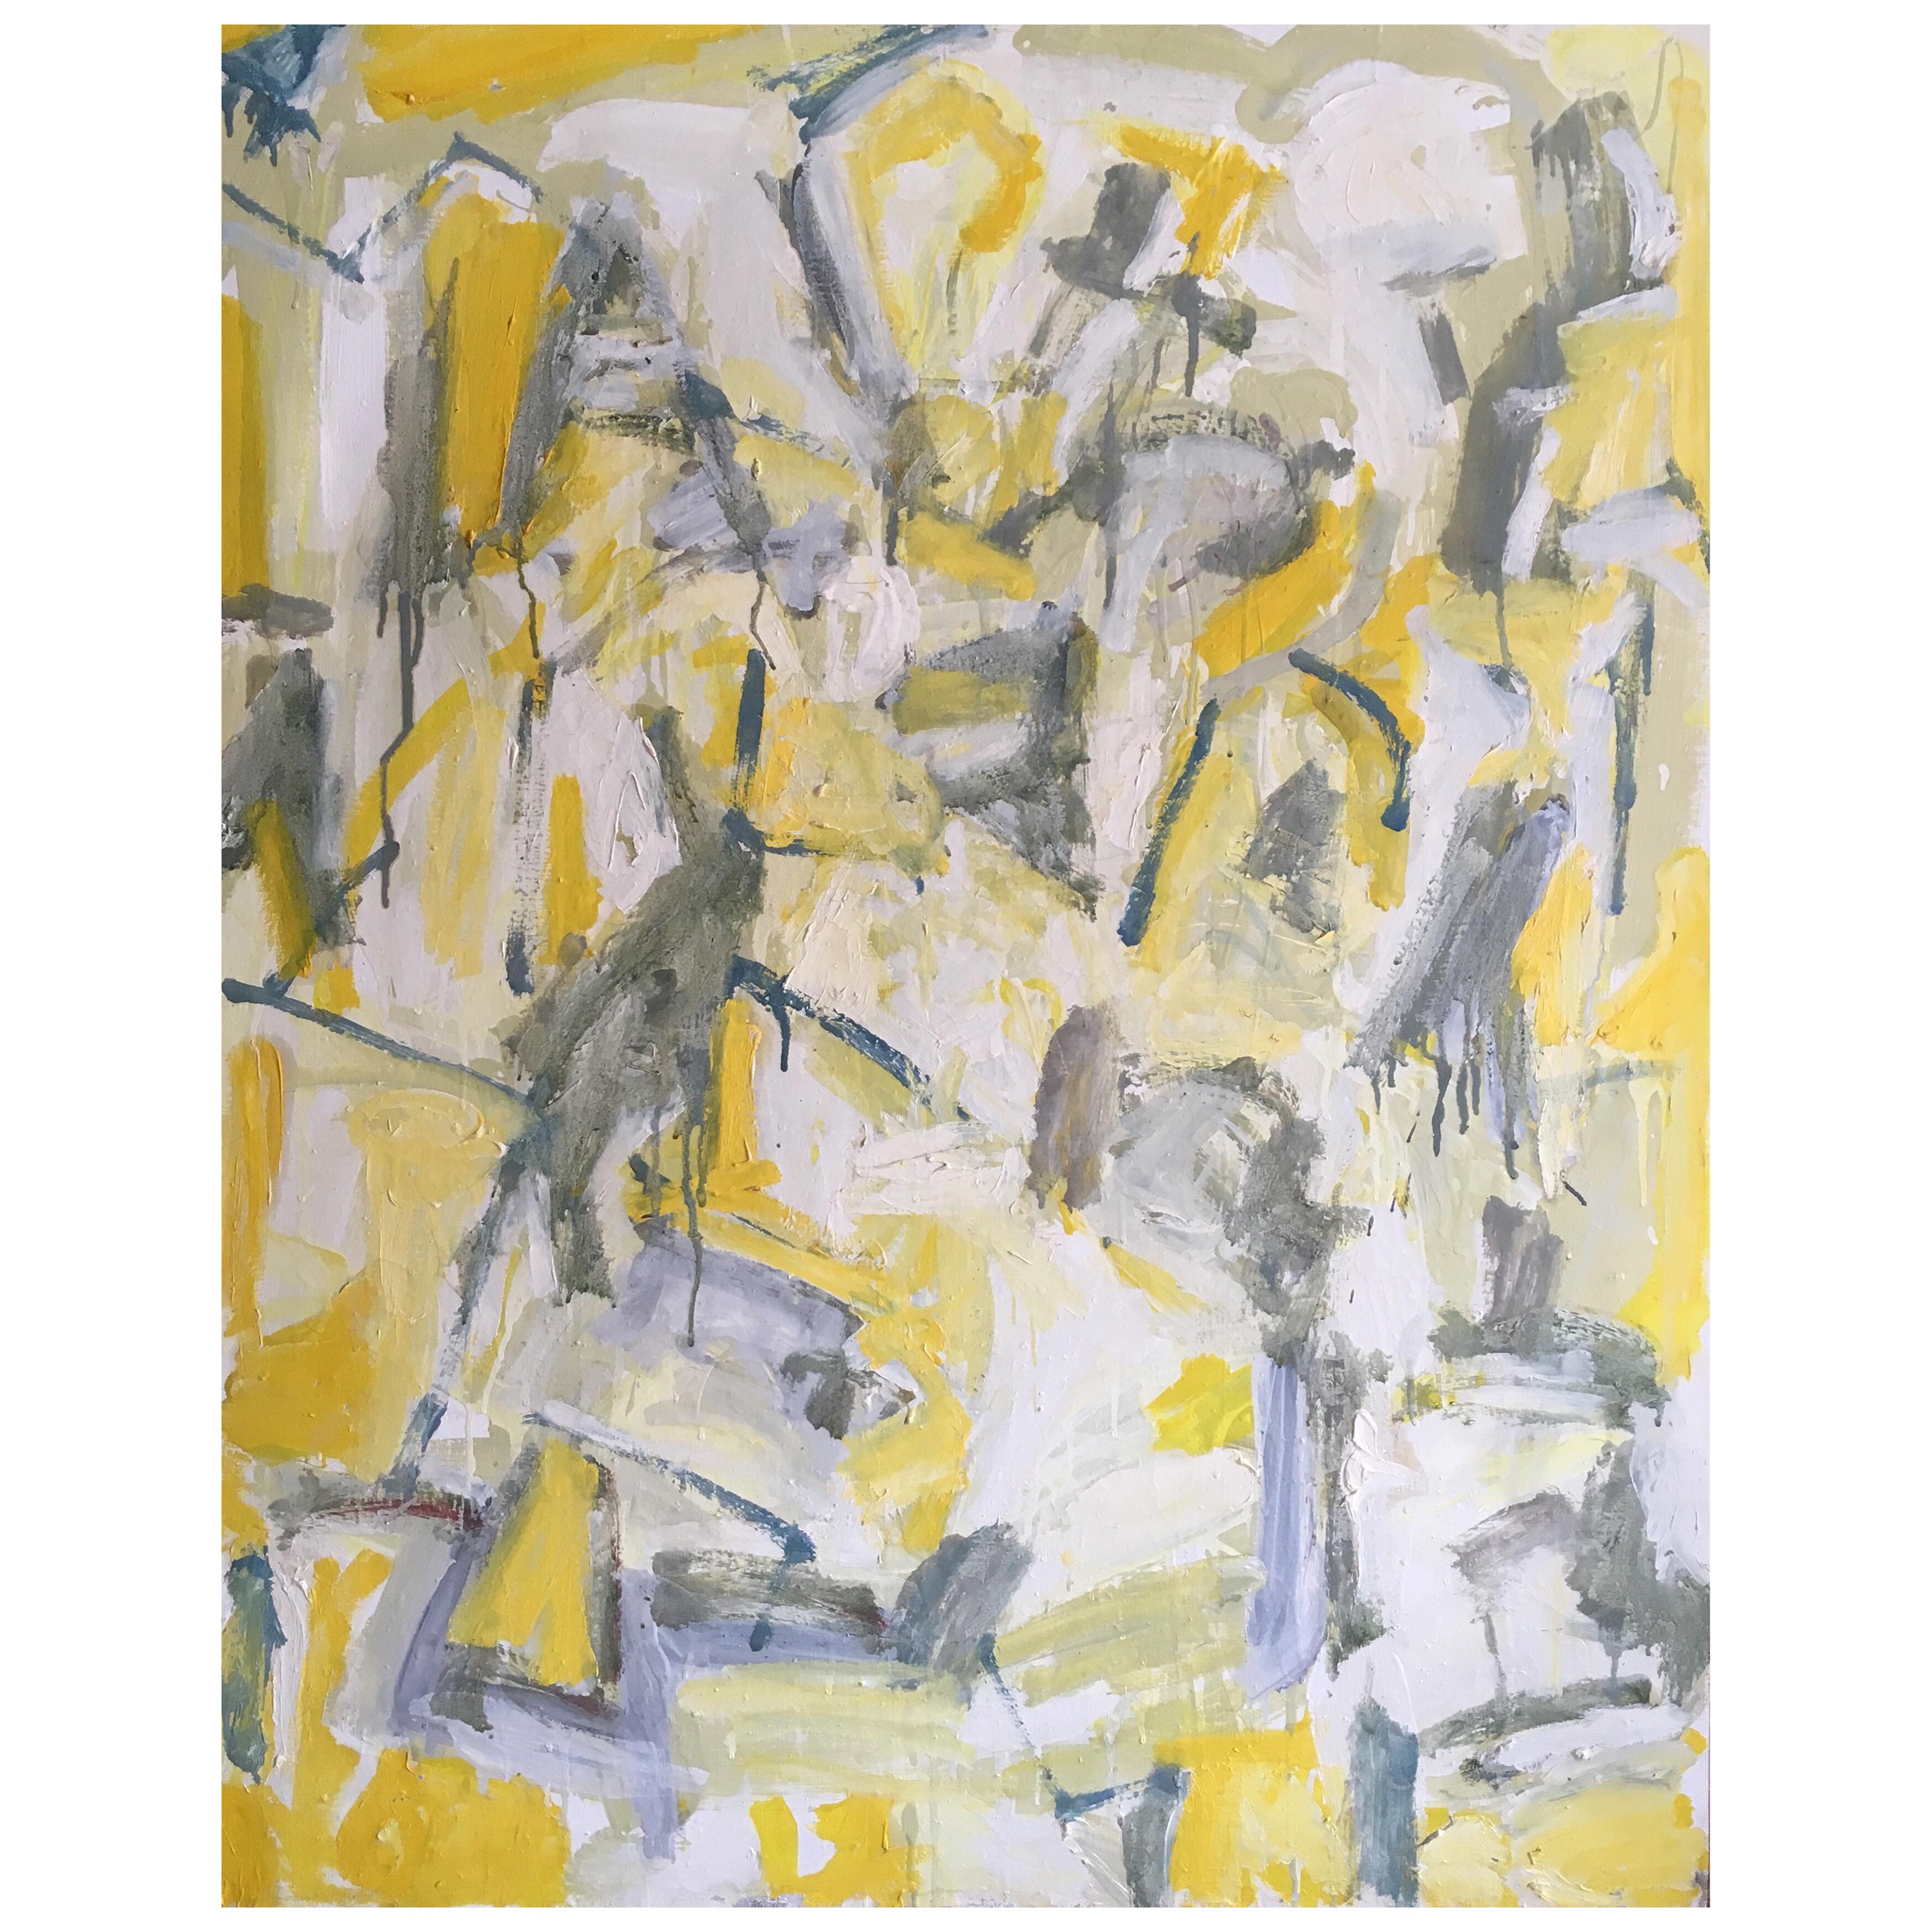 Unknown Interior Painting - Yellow and Grey Abstract Huge Oil Painting on Canvas Cubist Expressionist work